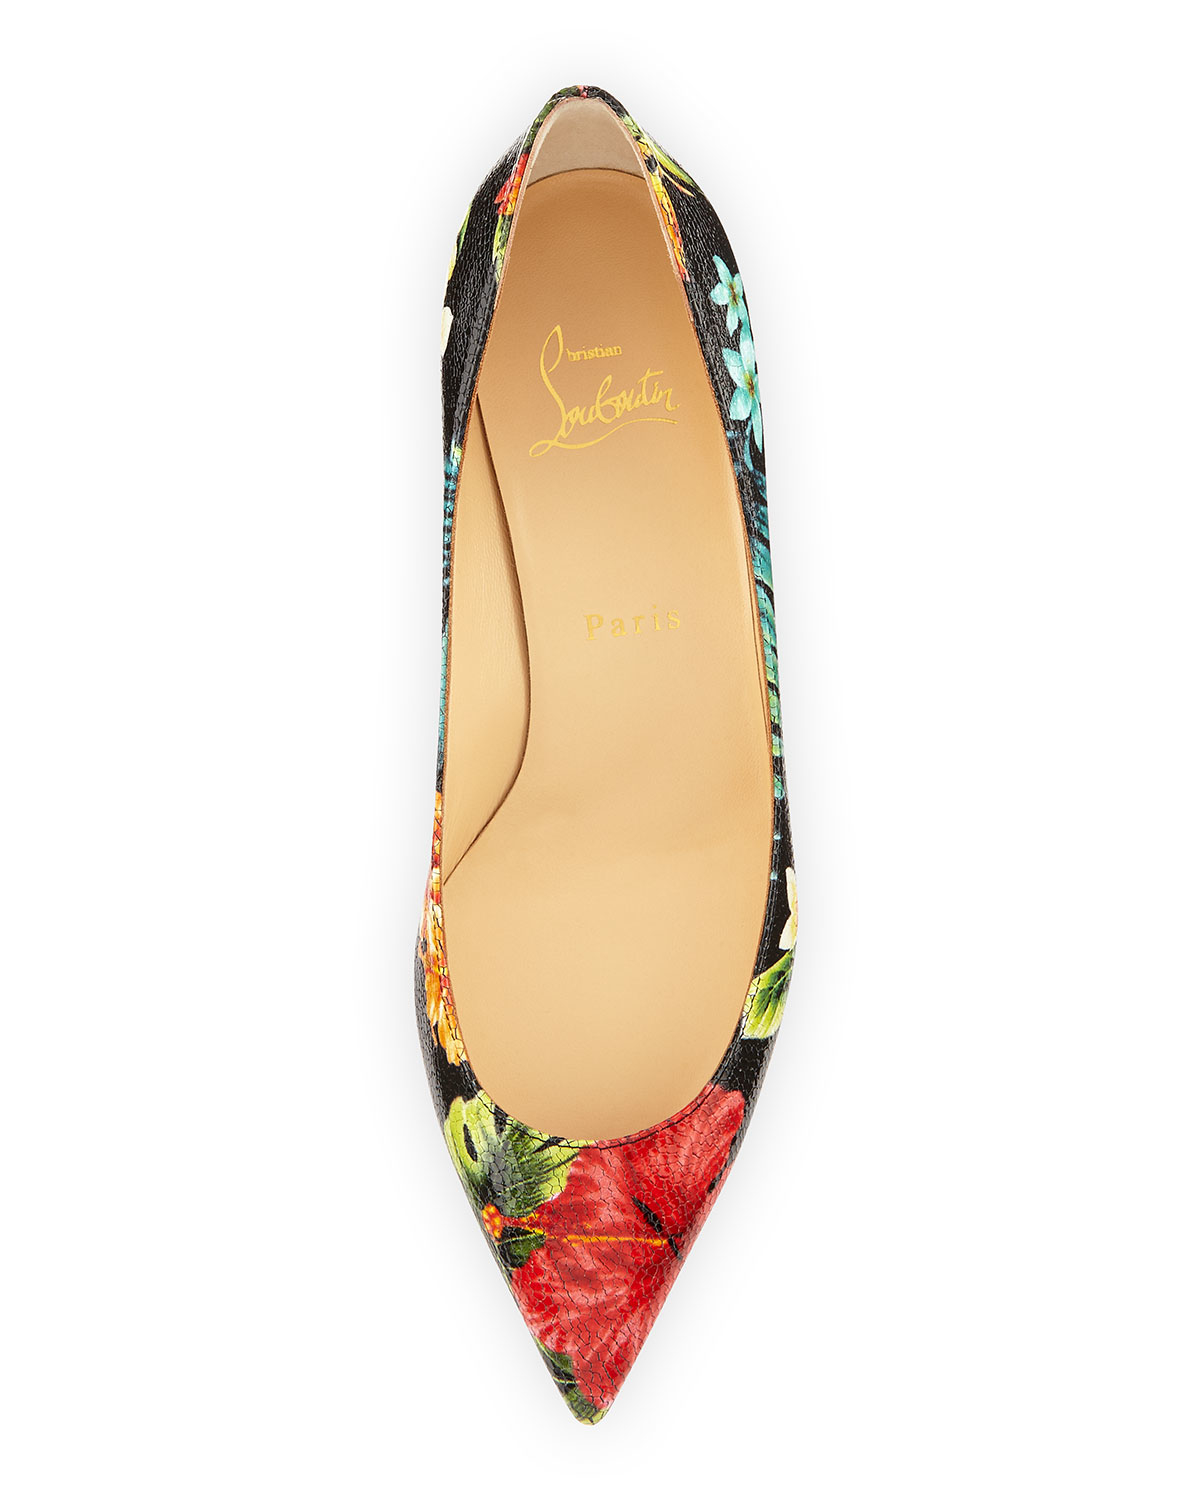 Christian louboutin Pigalle Follies Floral 55mm Red Sole Pump in ...